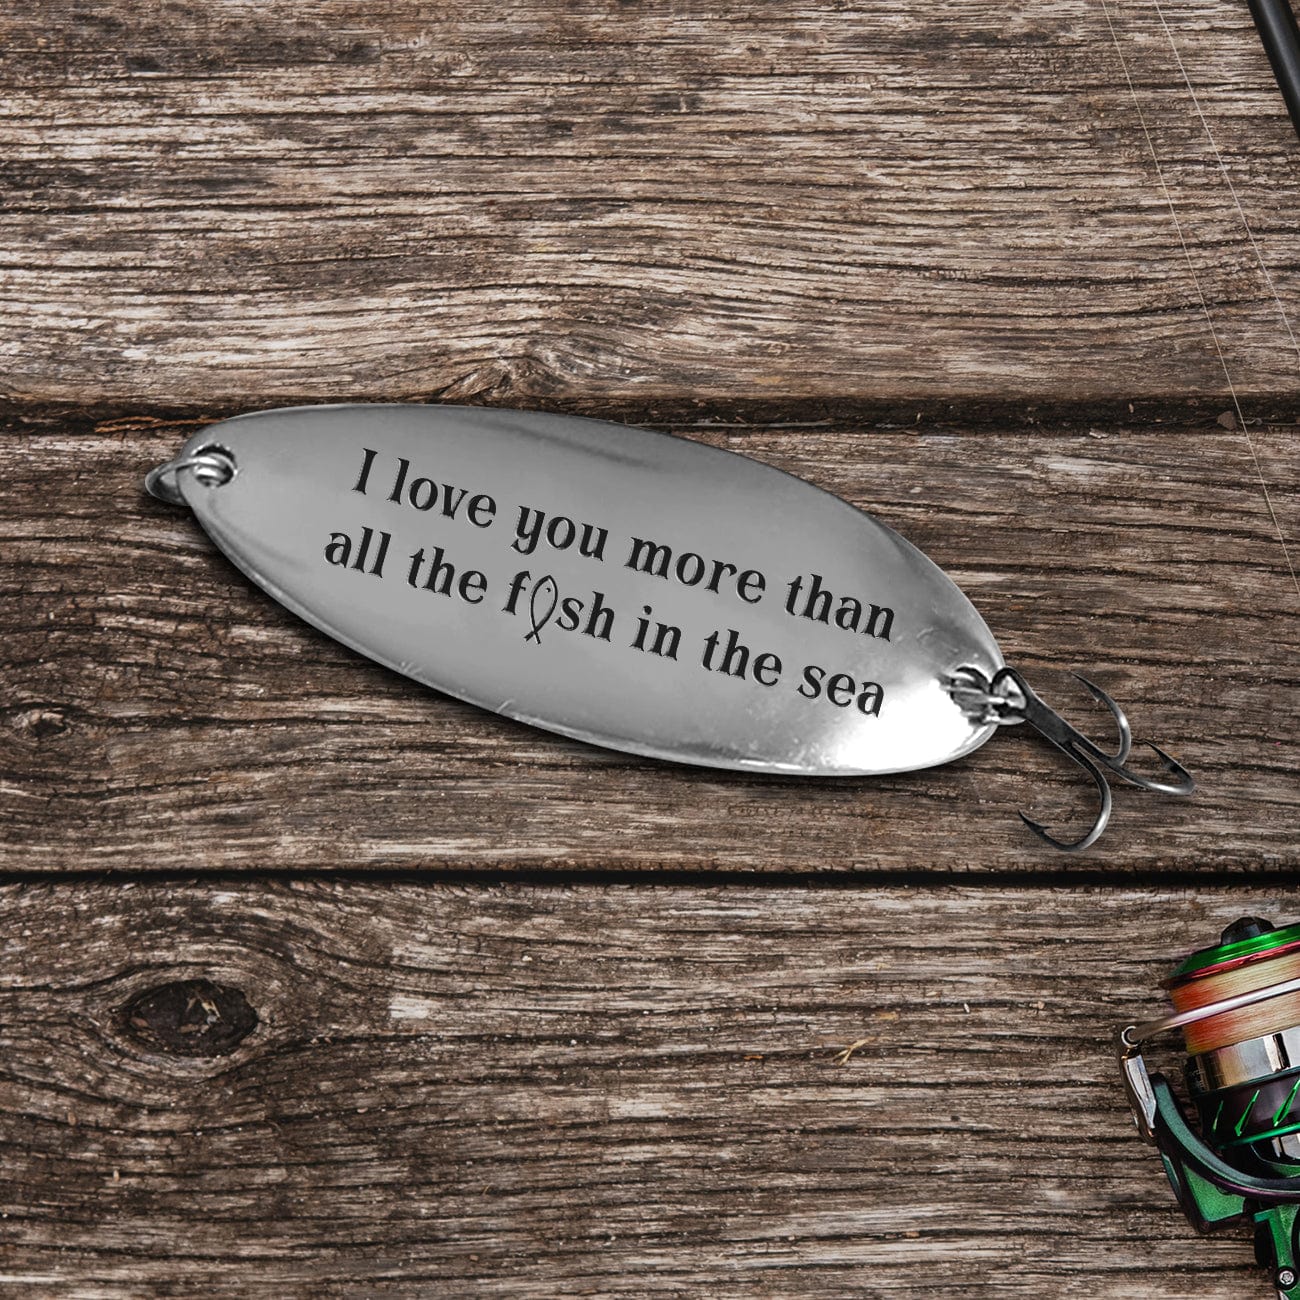 Prom Gifts for Boyfriend Fishing Lure Keepsake Gift Girlfriend Prom In – C  and T Custom Lures